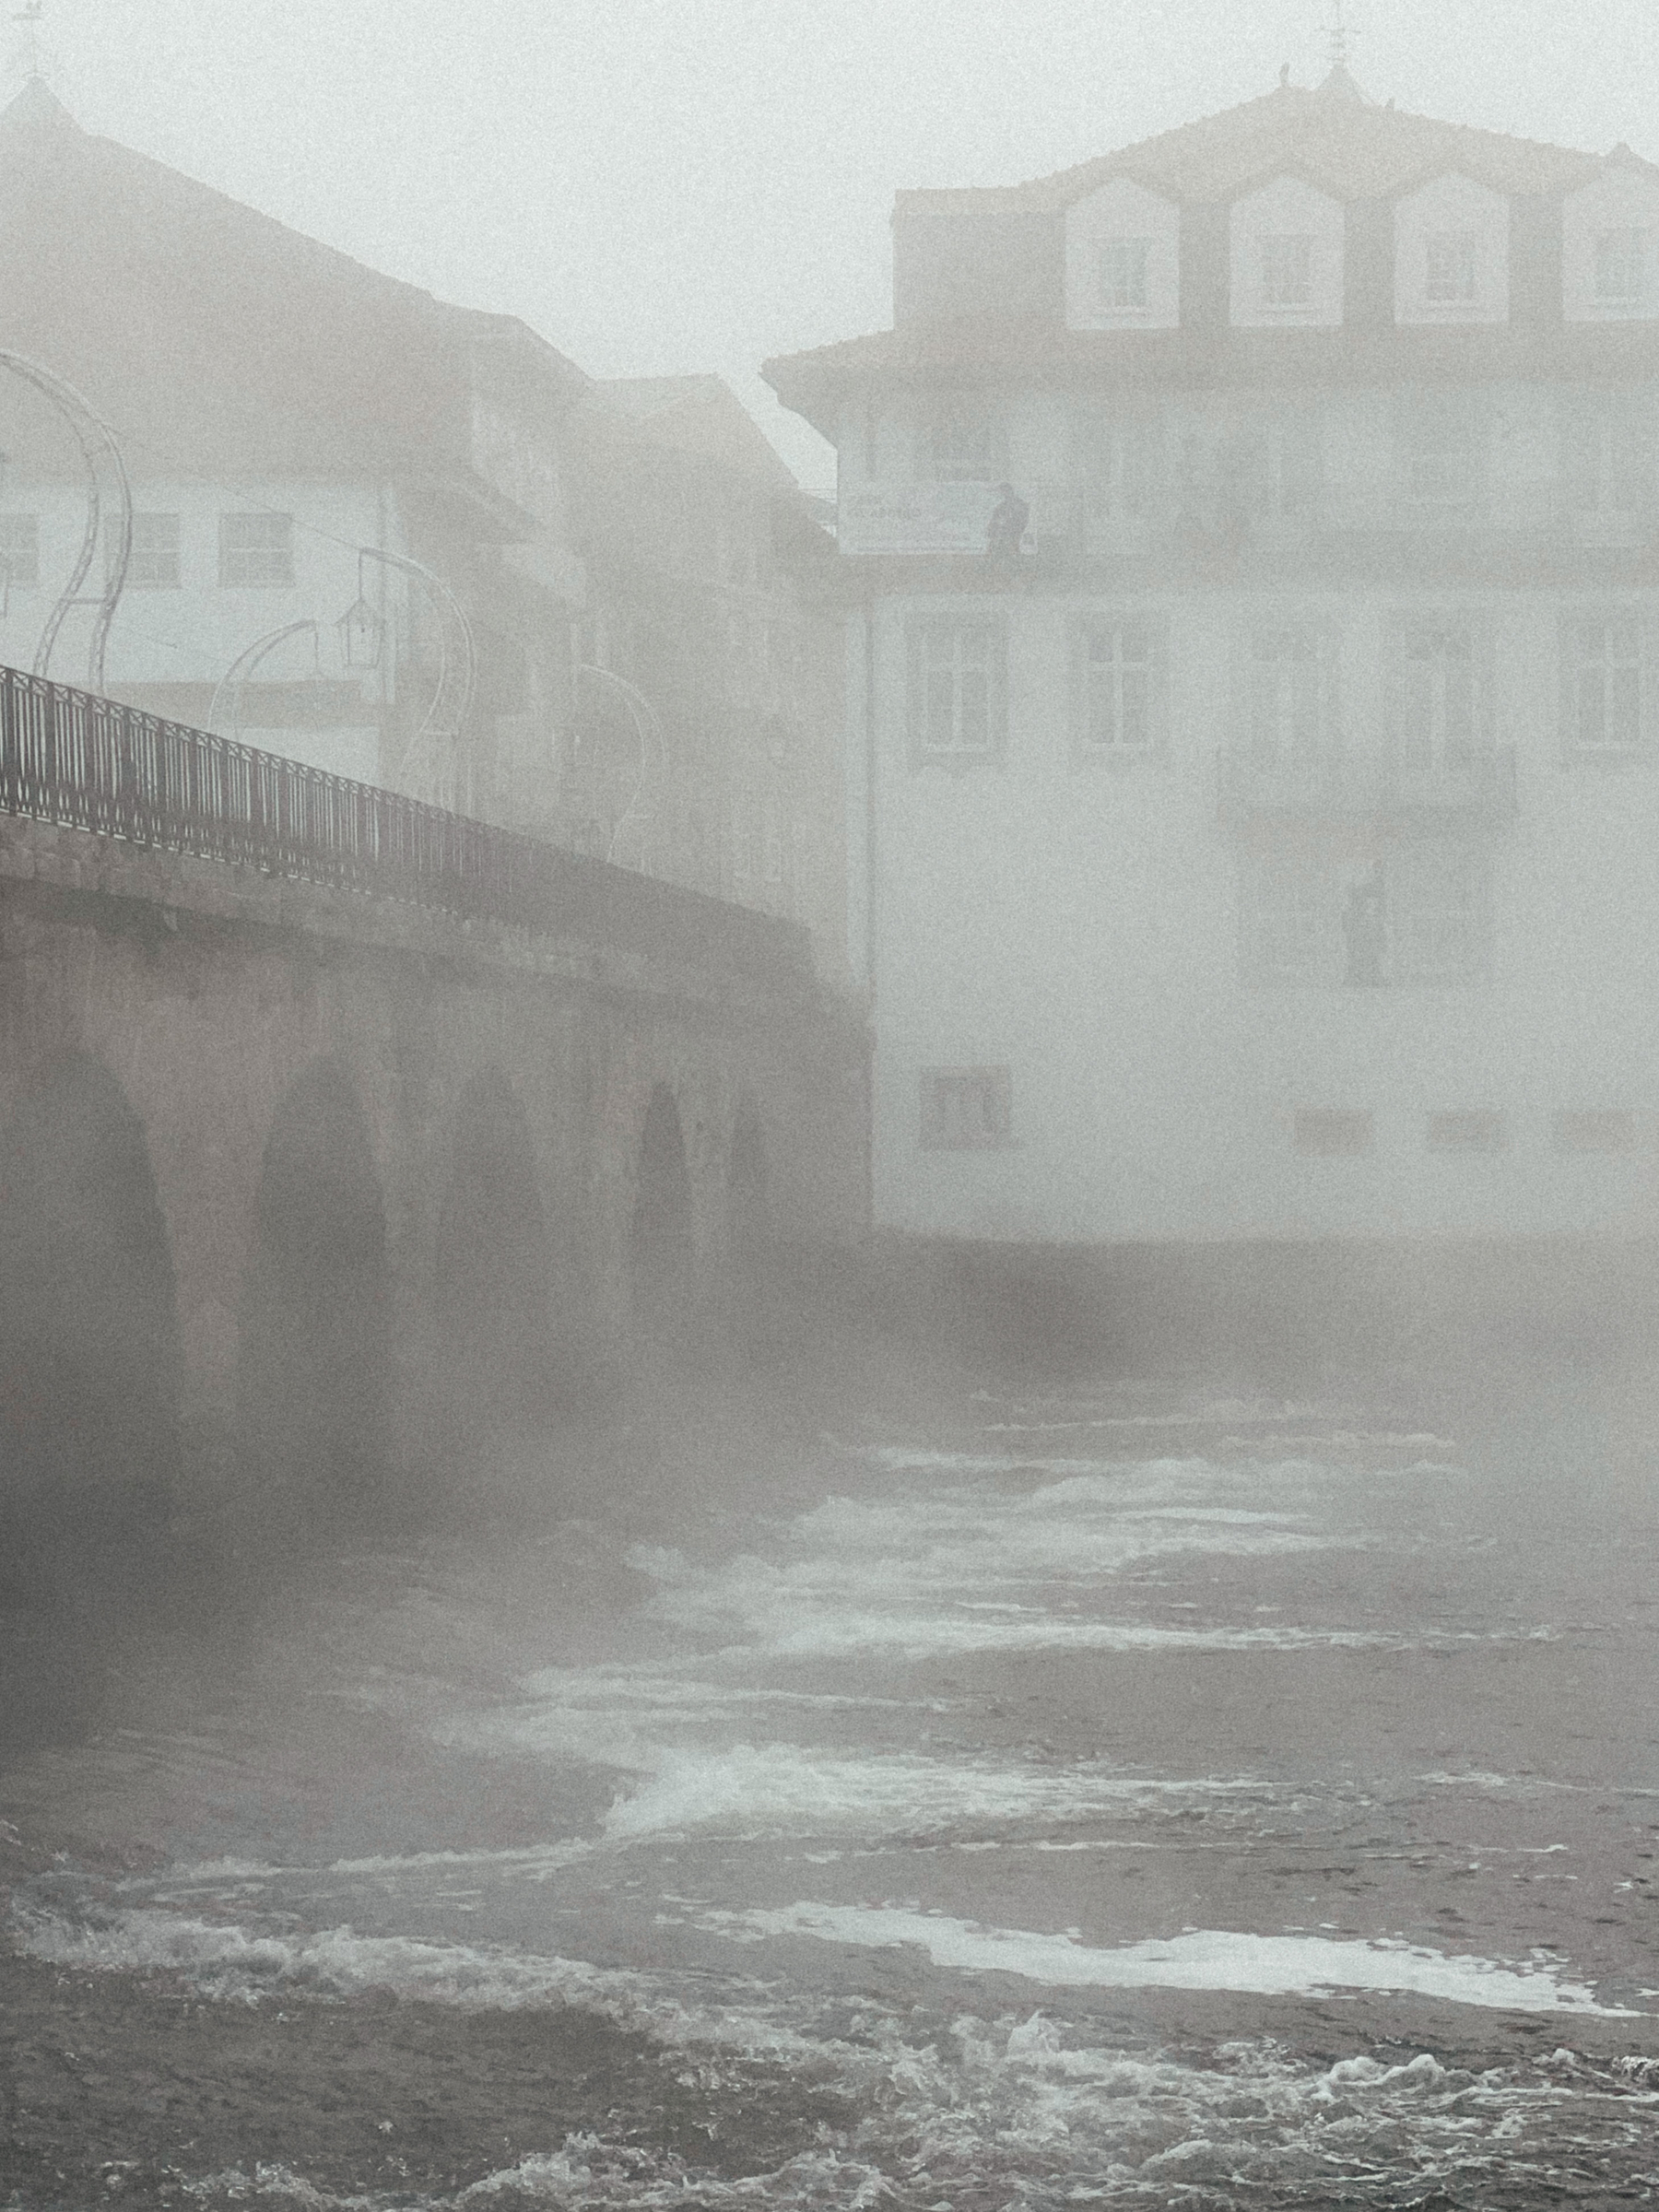 Roman bridge in a river, during a misty morning. 